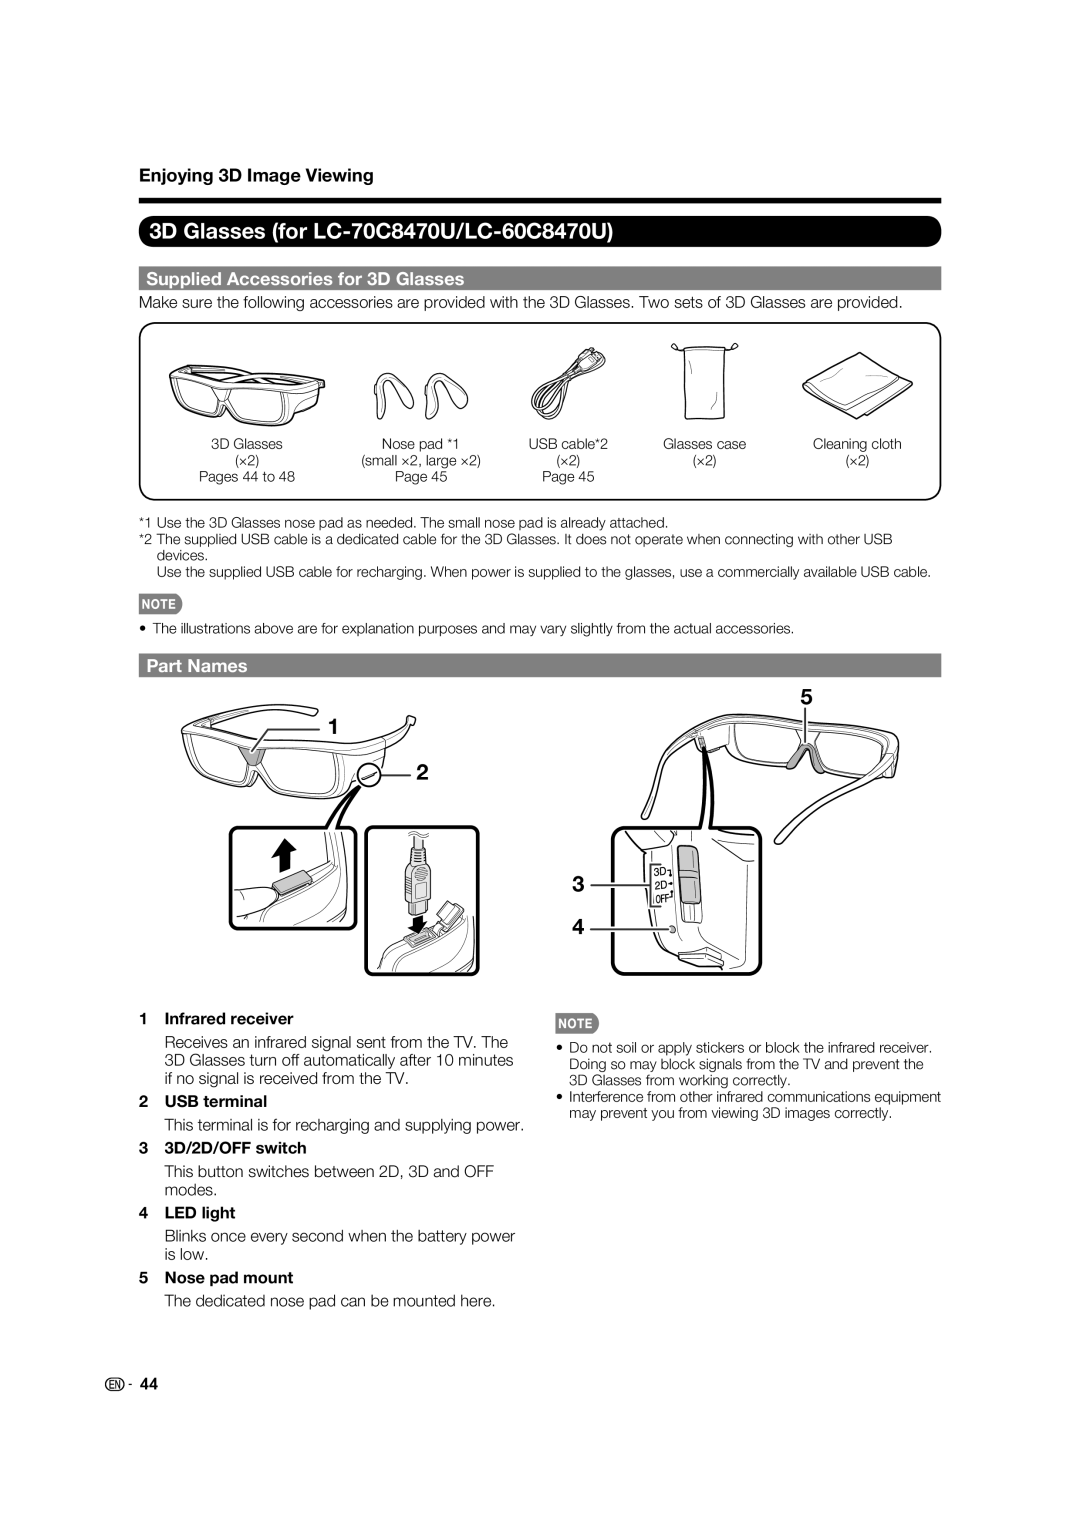 Sharp LC-60C7450U 3D Glasses for LC-70C8470U/LC-60C8470U, Enjoying 3D Image Viewing, Supplied Accessories for 3D Glasses 